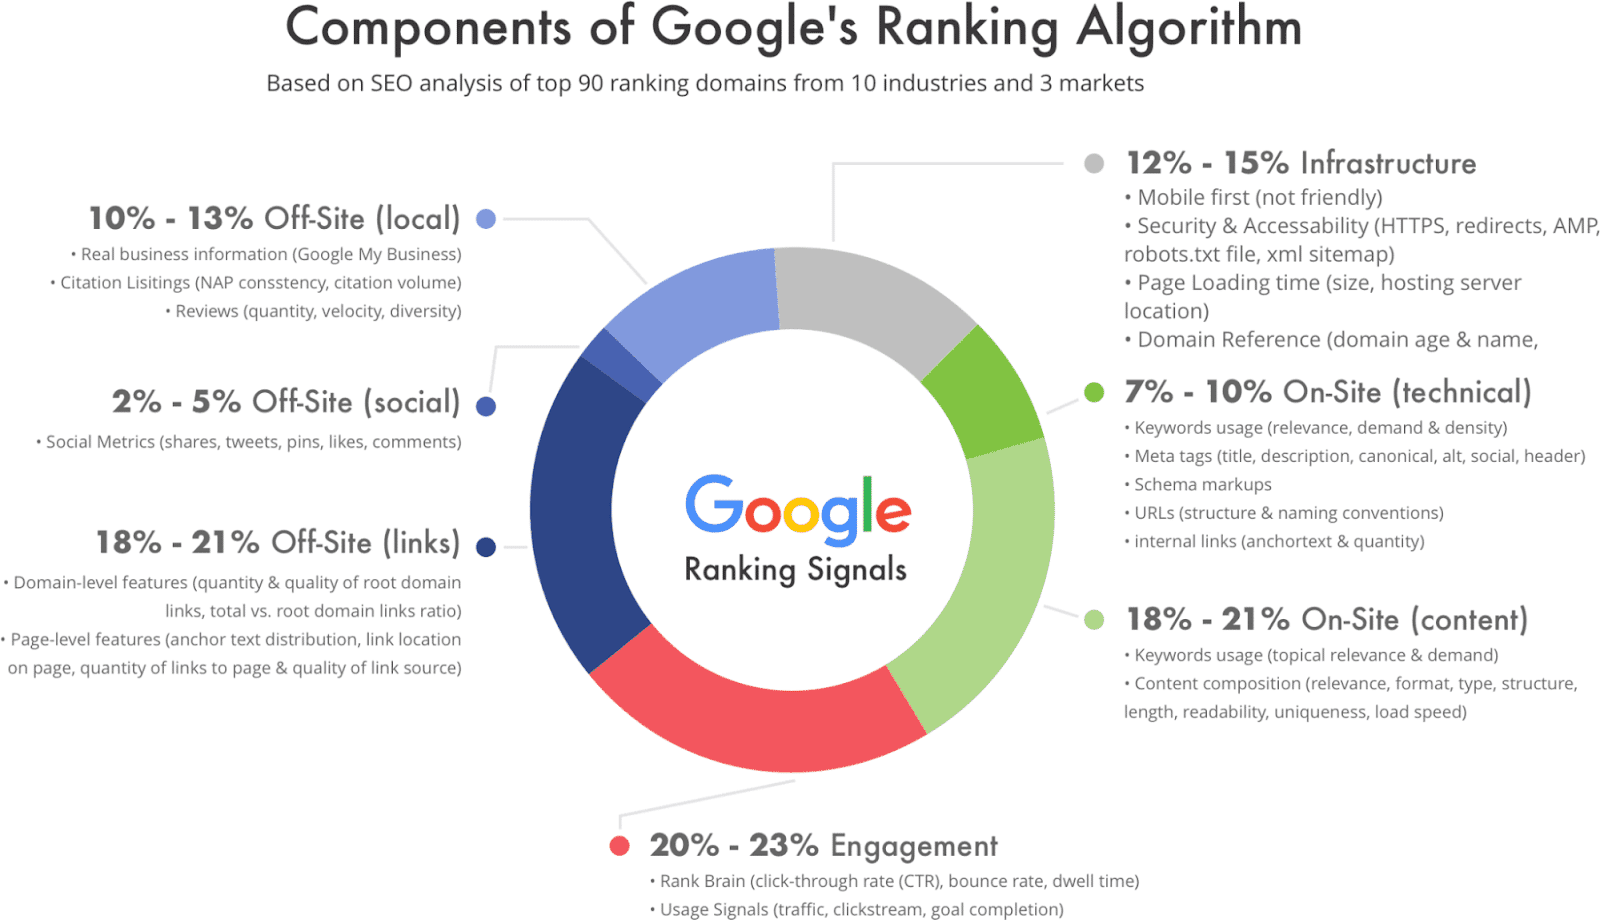 Pie chart showing Google's ranking parameters